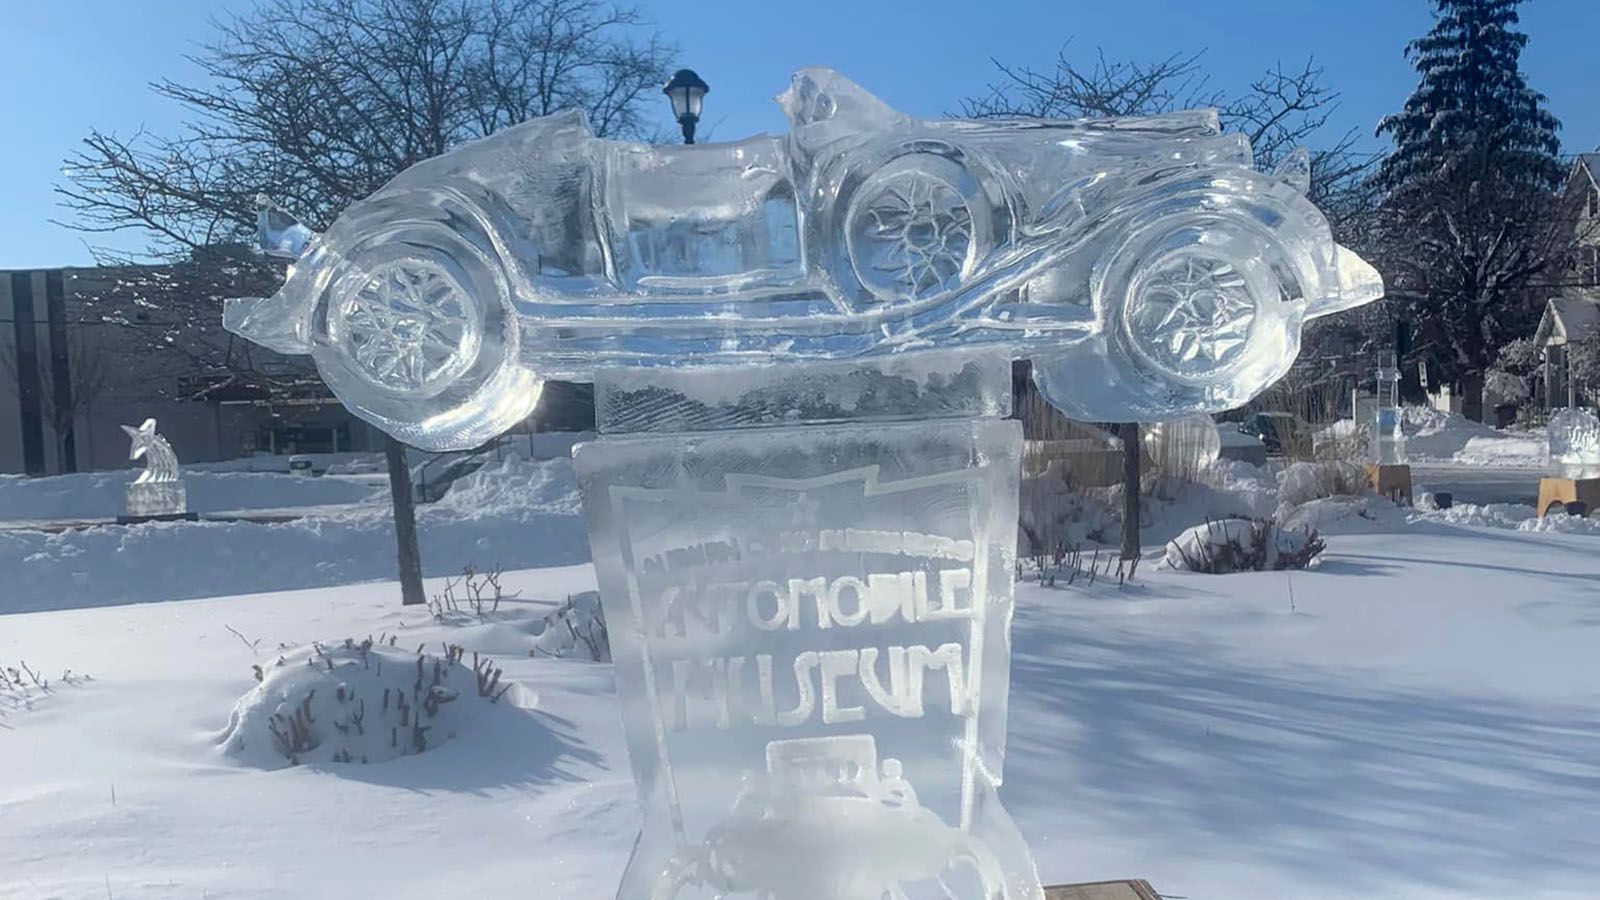 There will be plenty of ice sculptures at Auburn's Winter Fest on Friday, Feb. 2.